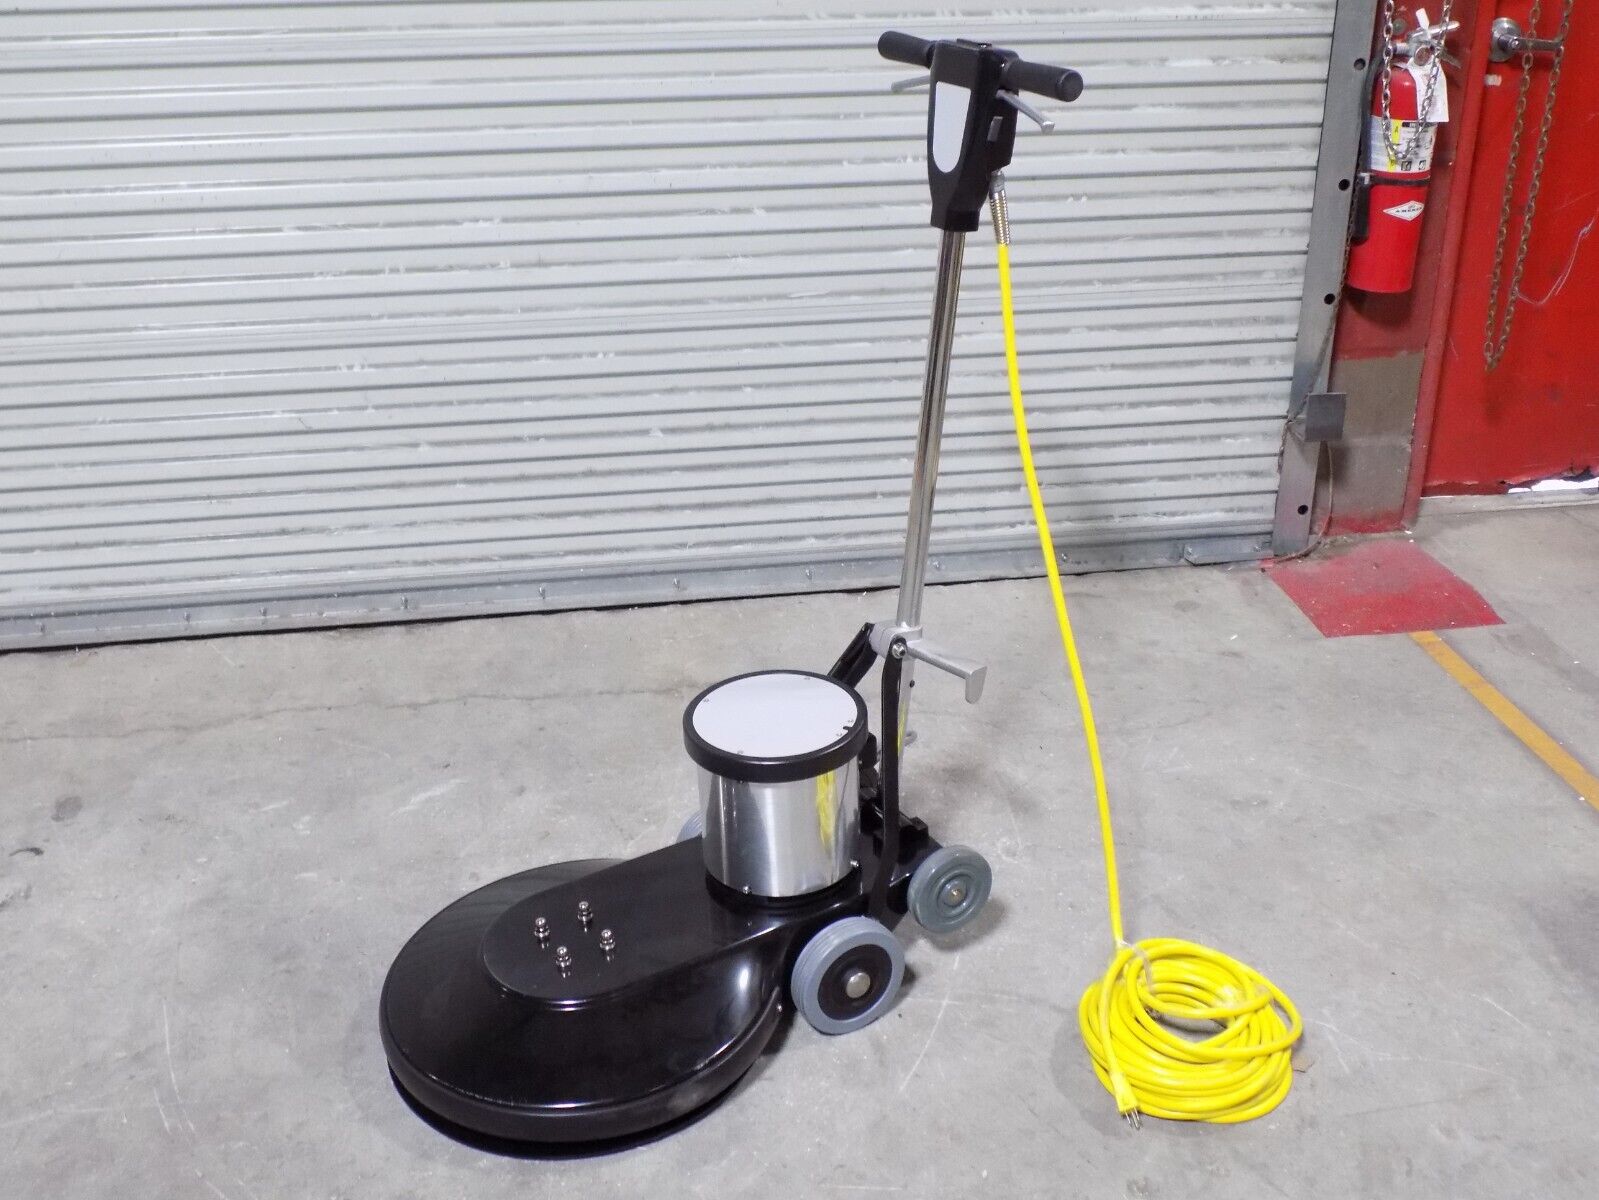 Task Pro 20 Electric Floor Burnisher 1 5 Hp 1500 Rpm 120v Tp1500 Industryrecycles